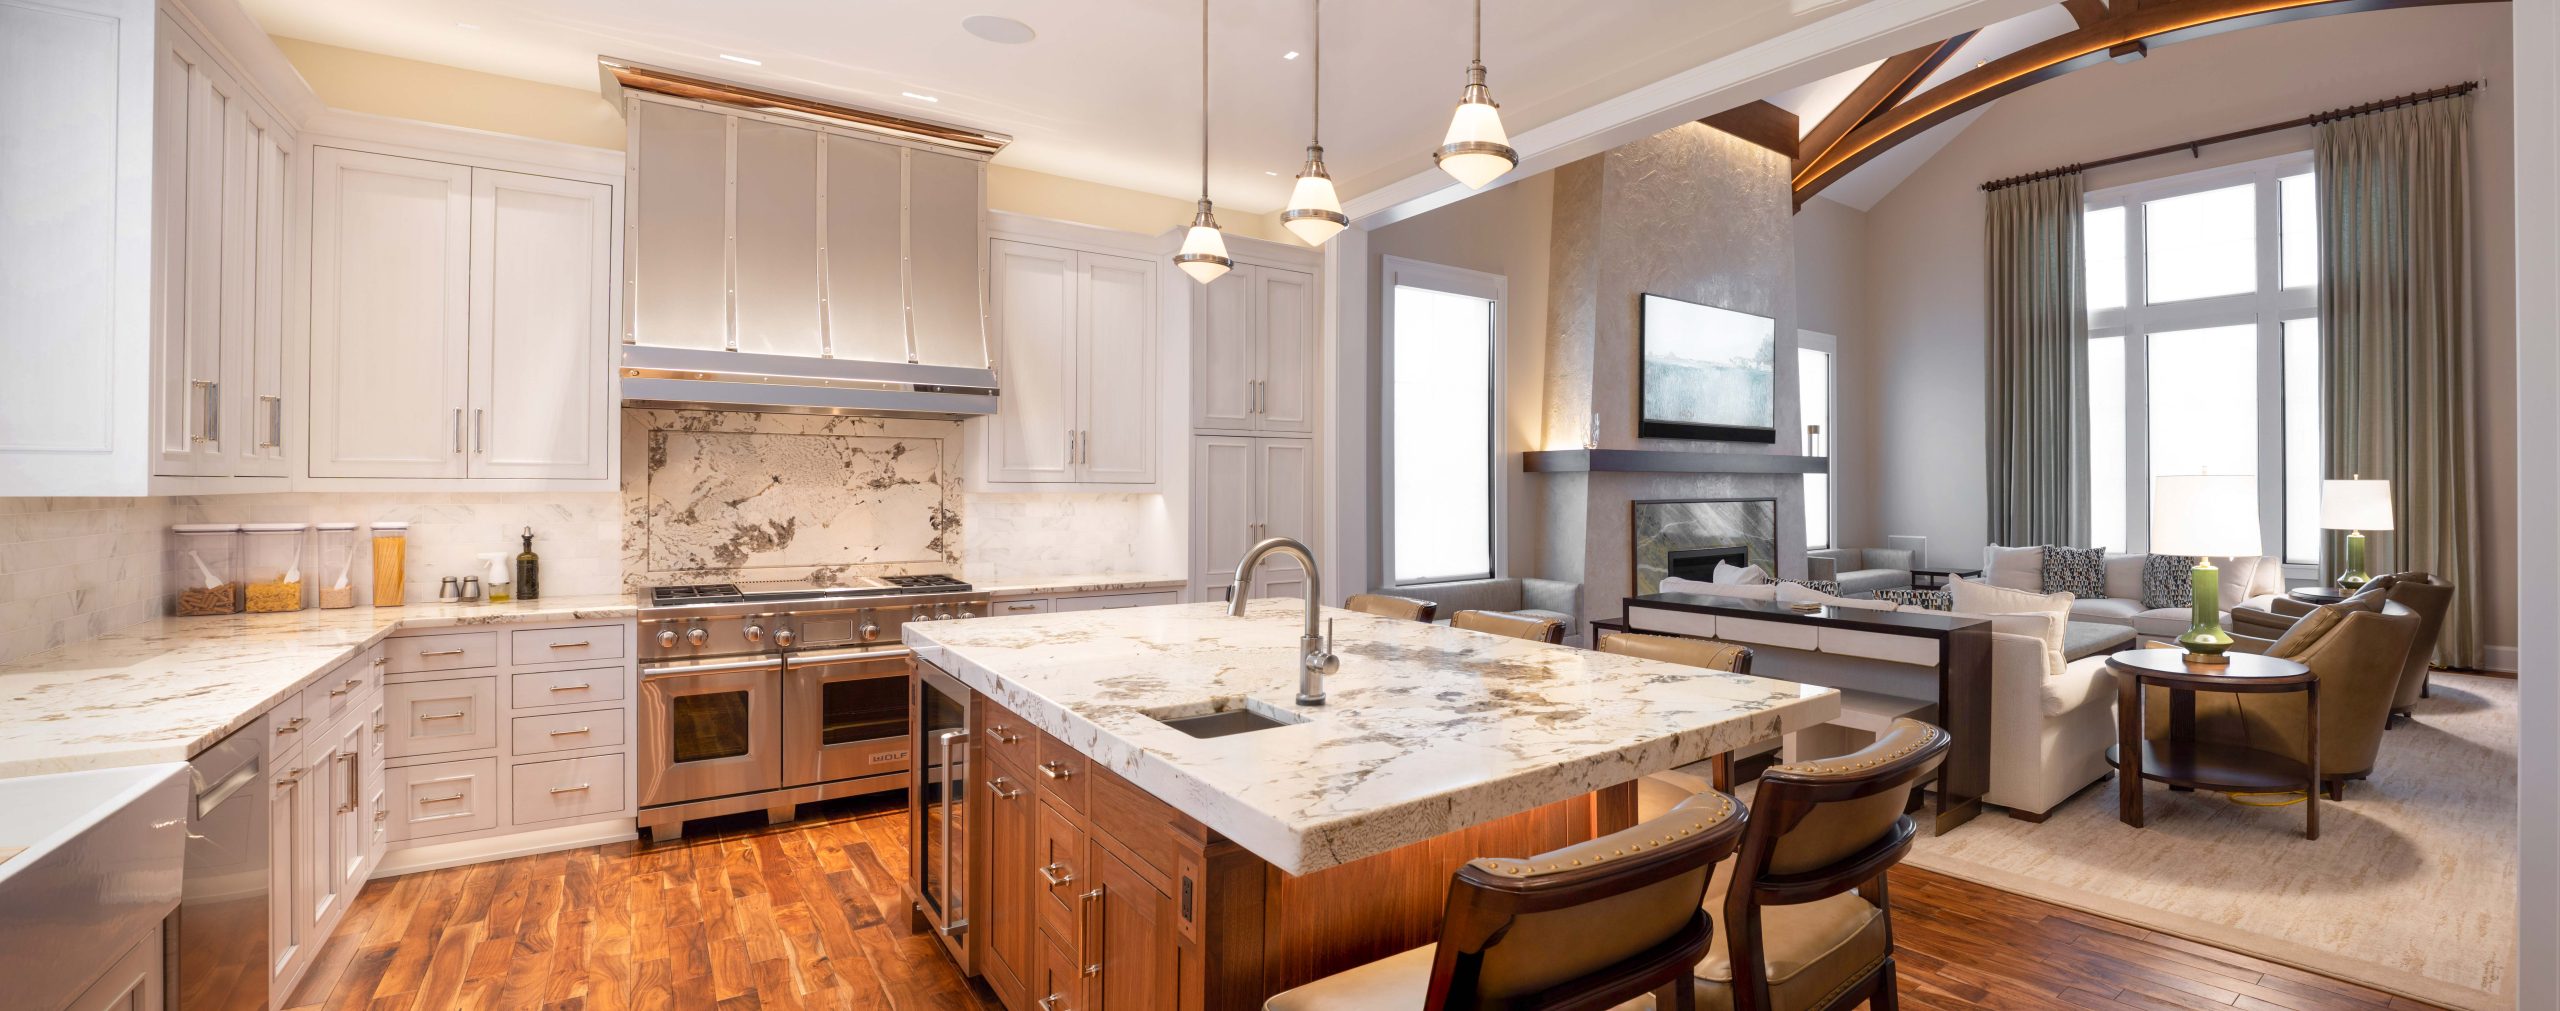 Grey inset kitchen cabinets with marble countertop